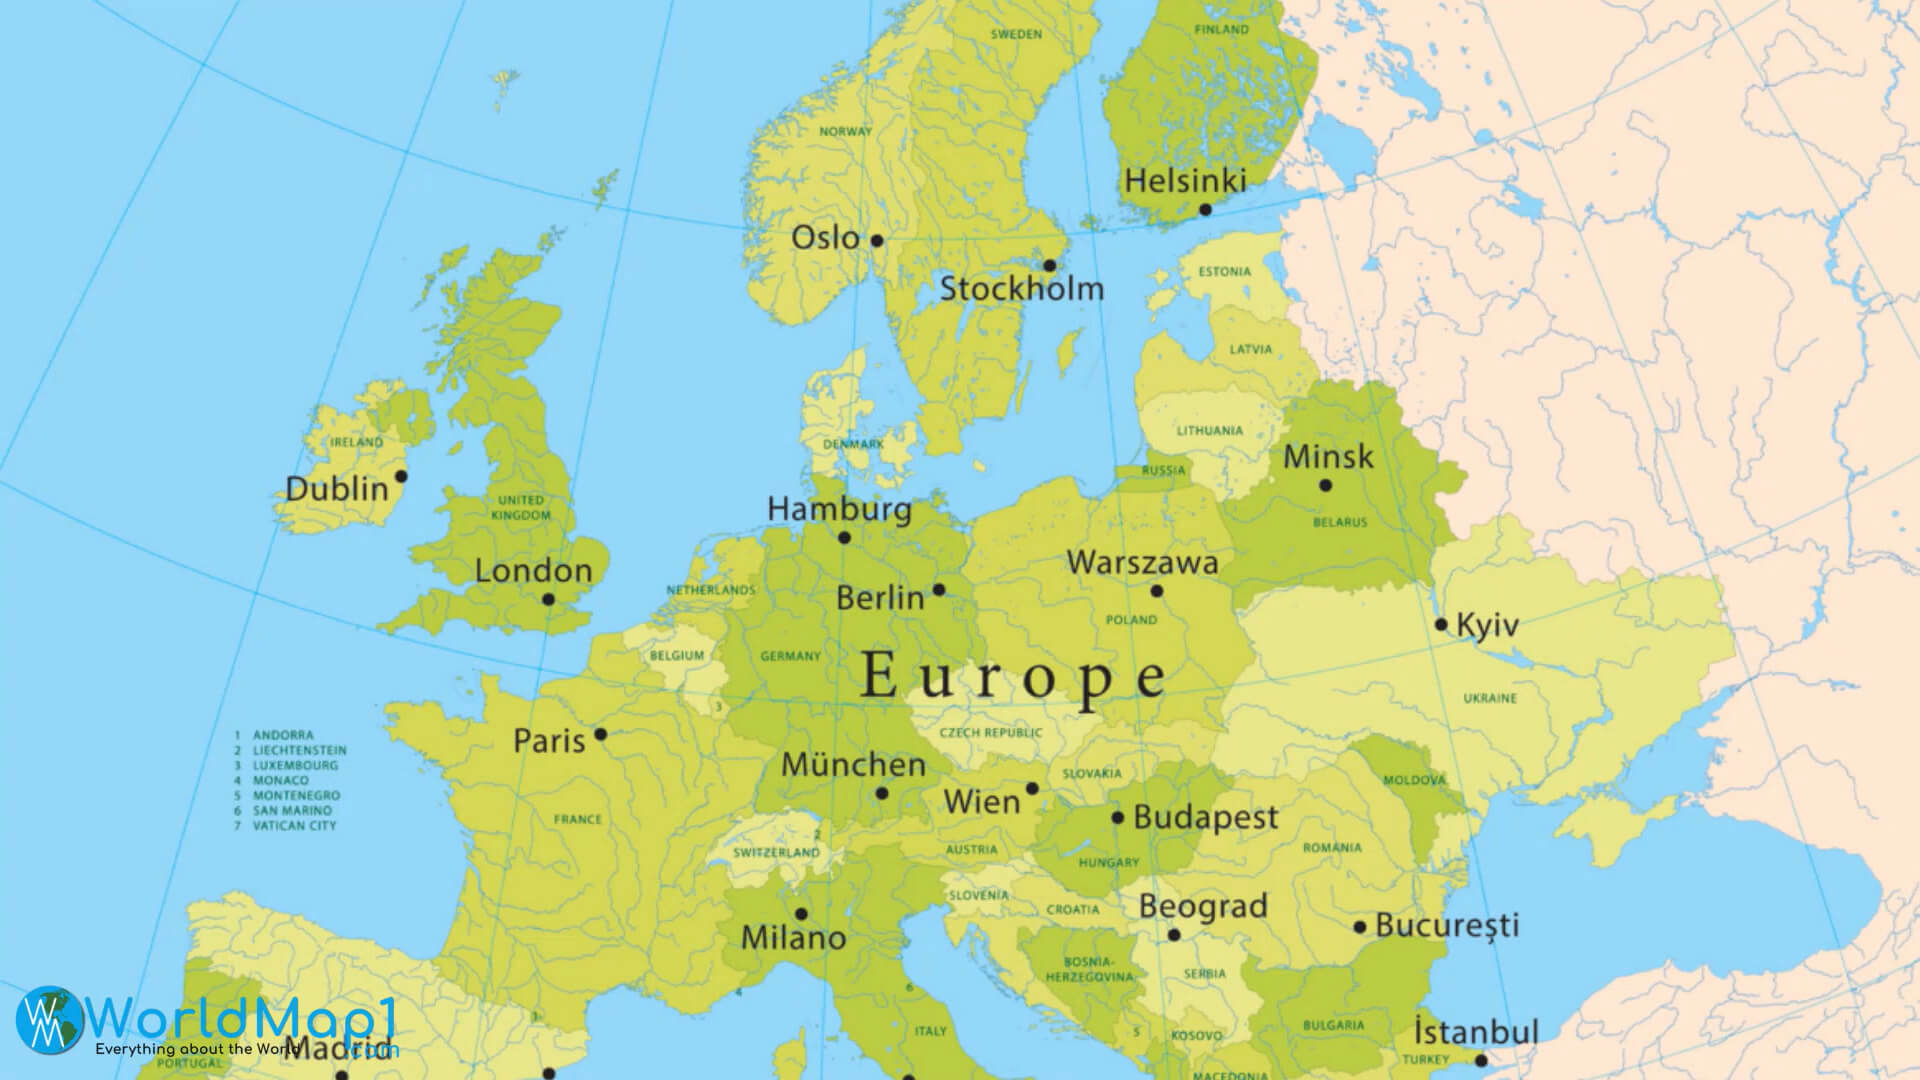 Estonia and Baltic Countries Map in Europe